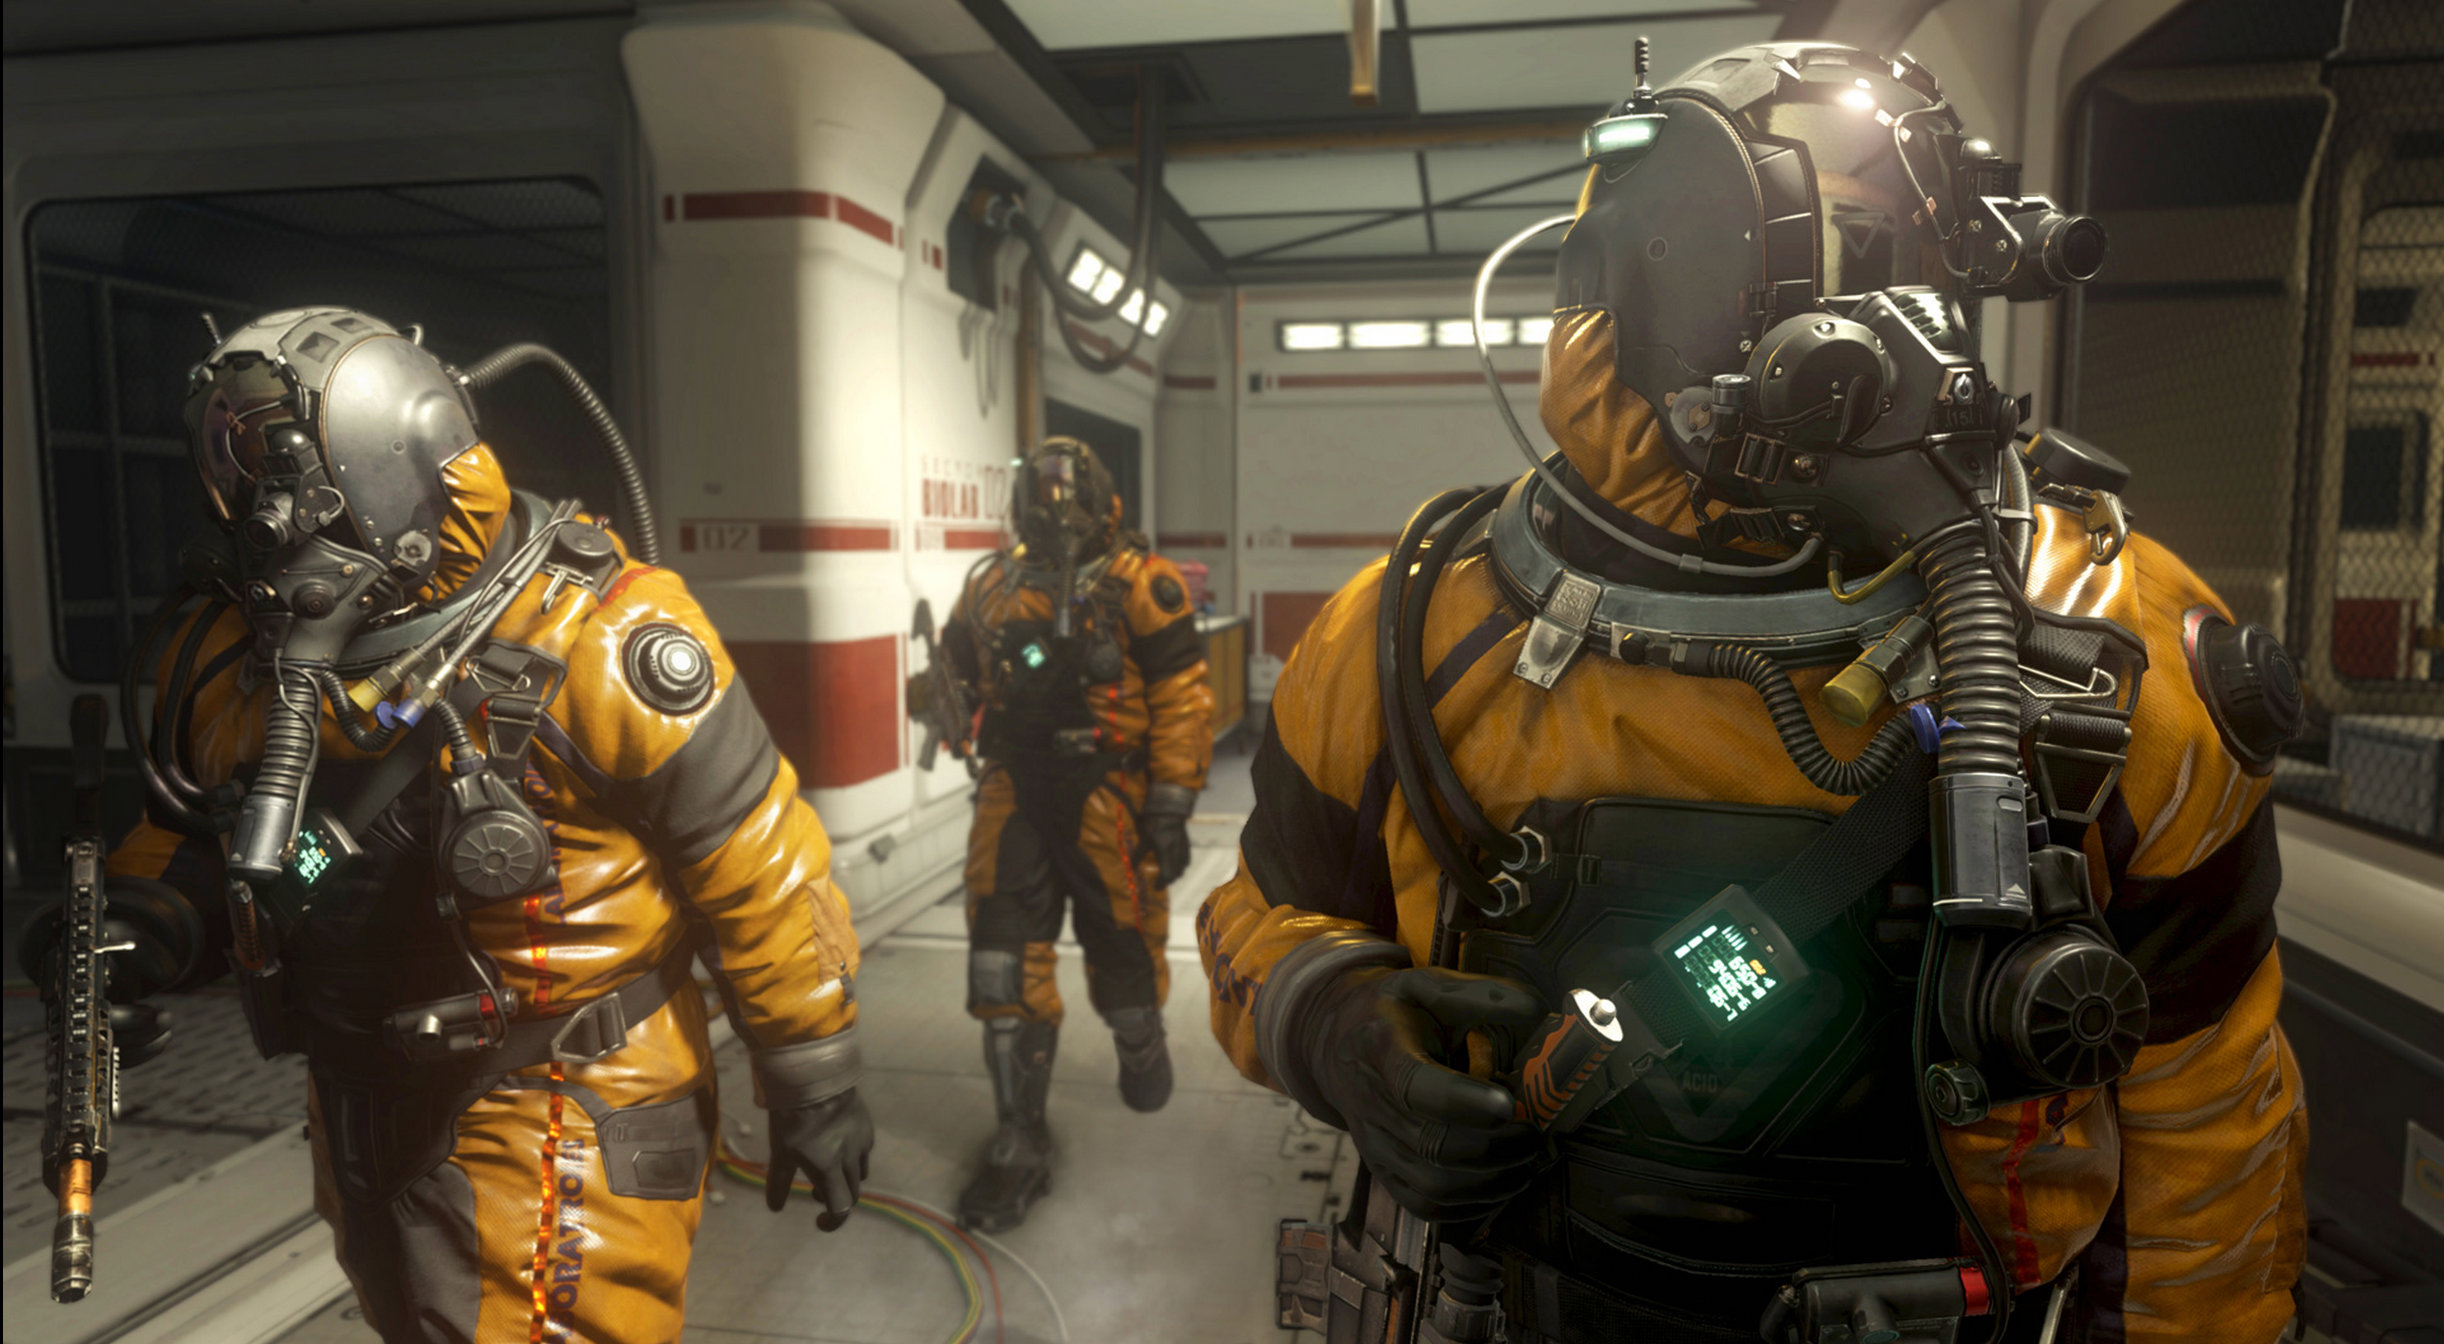 Call of Duty: Advanced Warfare system requirements